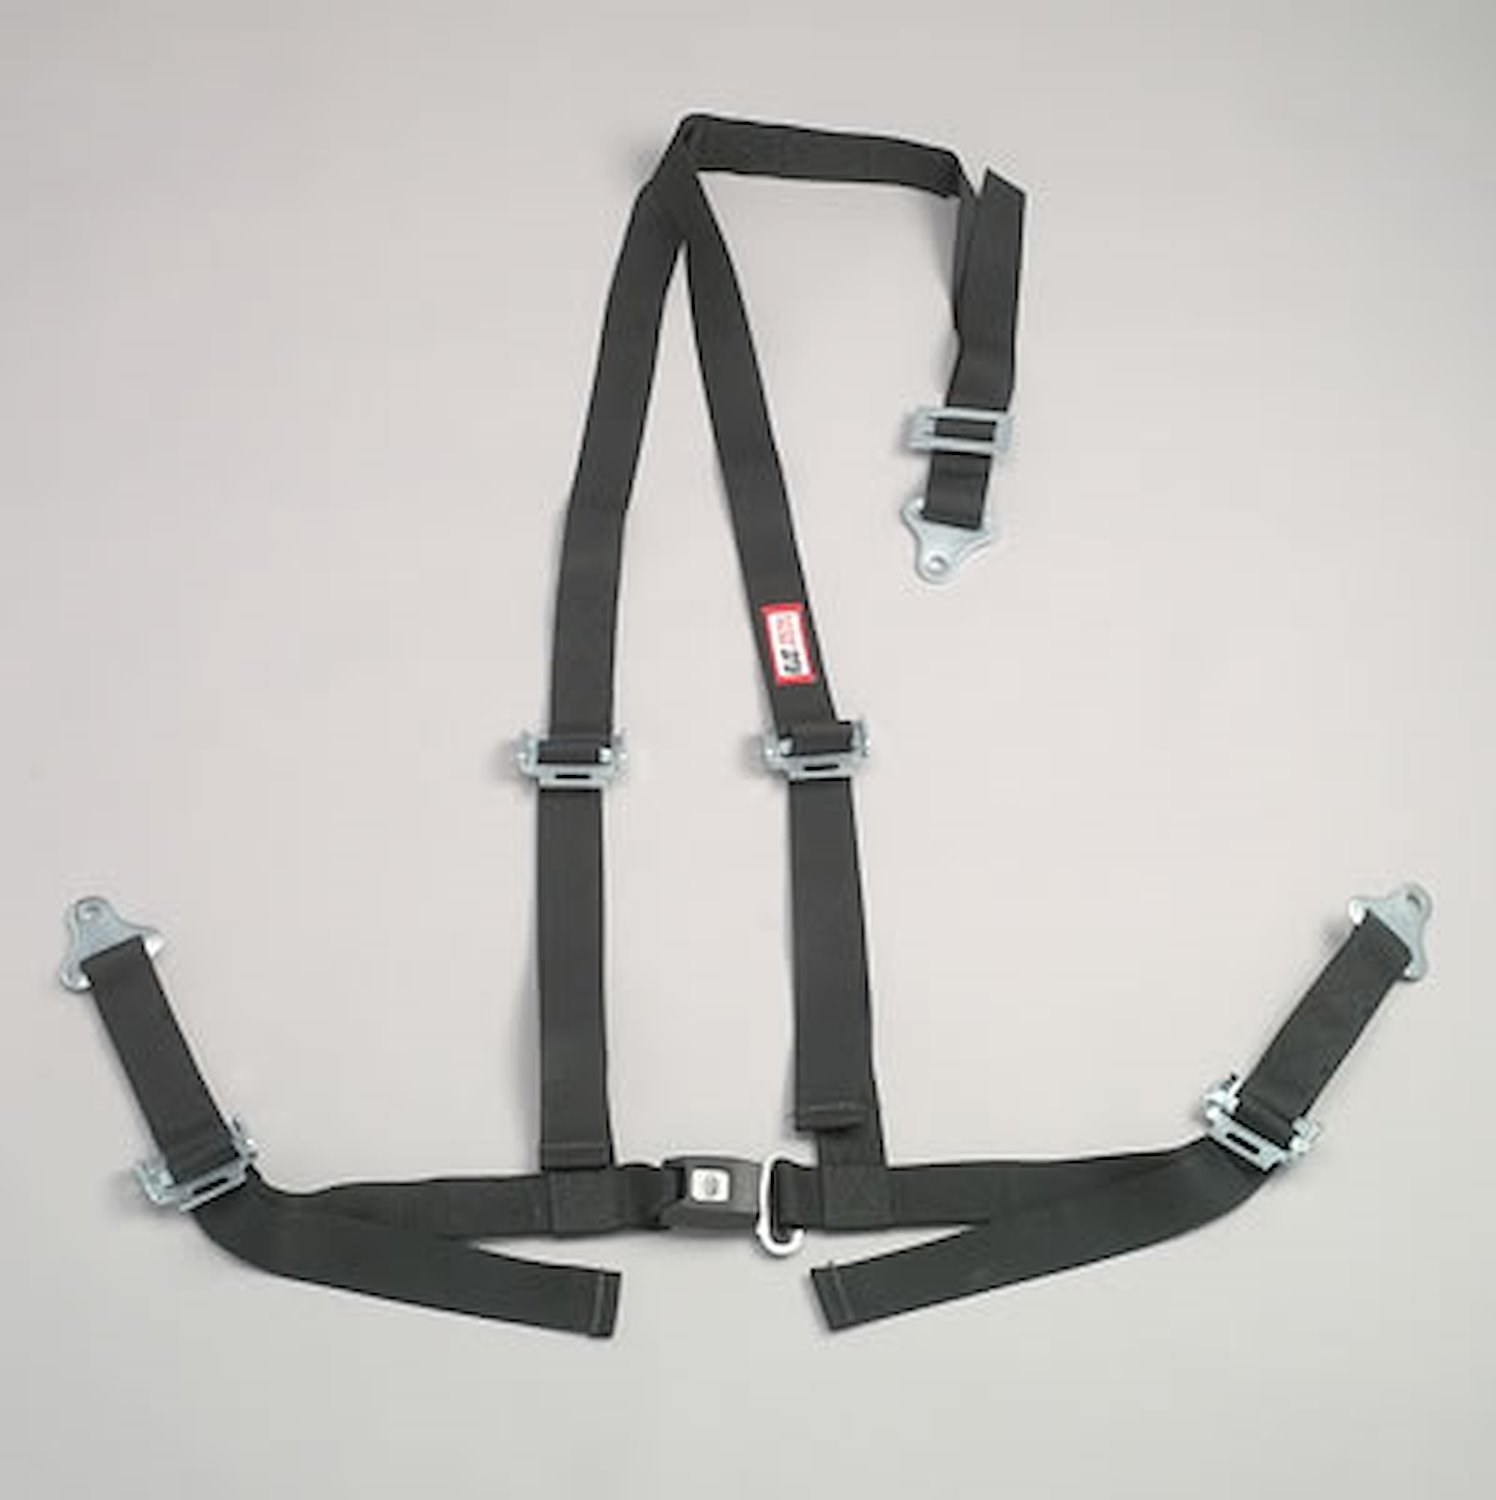 NON-SFI B&T HARNESS 2 PULL UP Lap Belt 2 S. H. Individual FLOOR Mount ALL WRAP ENDS w/STERNUM STRAP OD GREEN